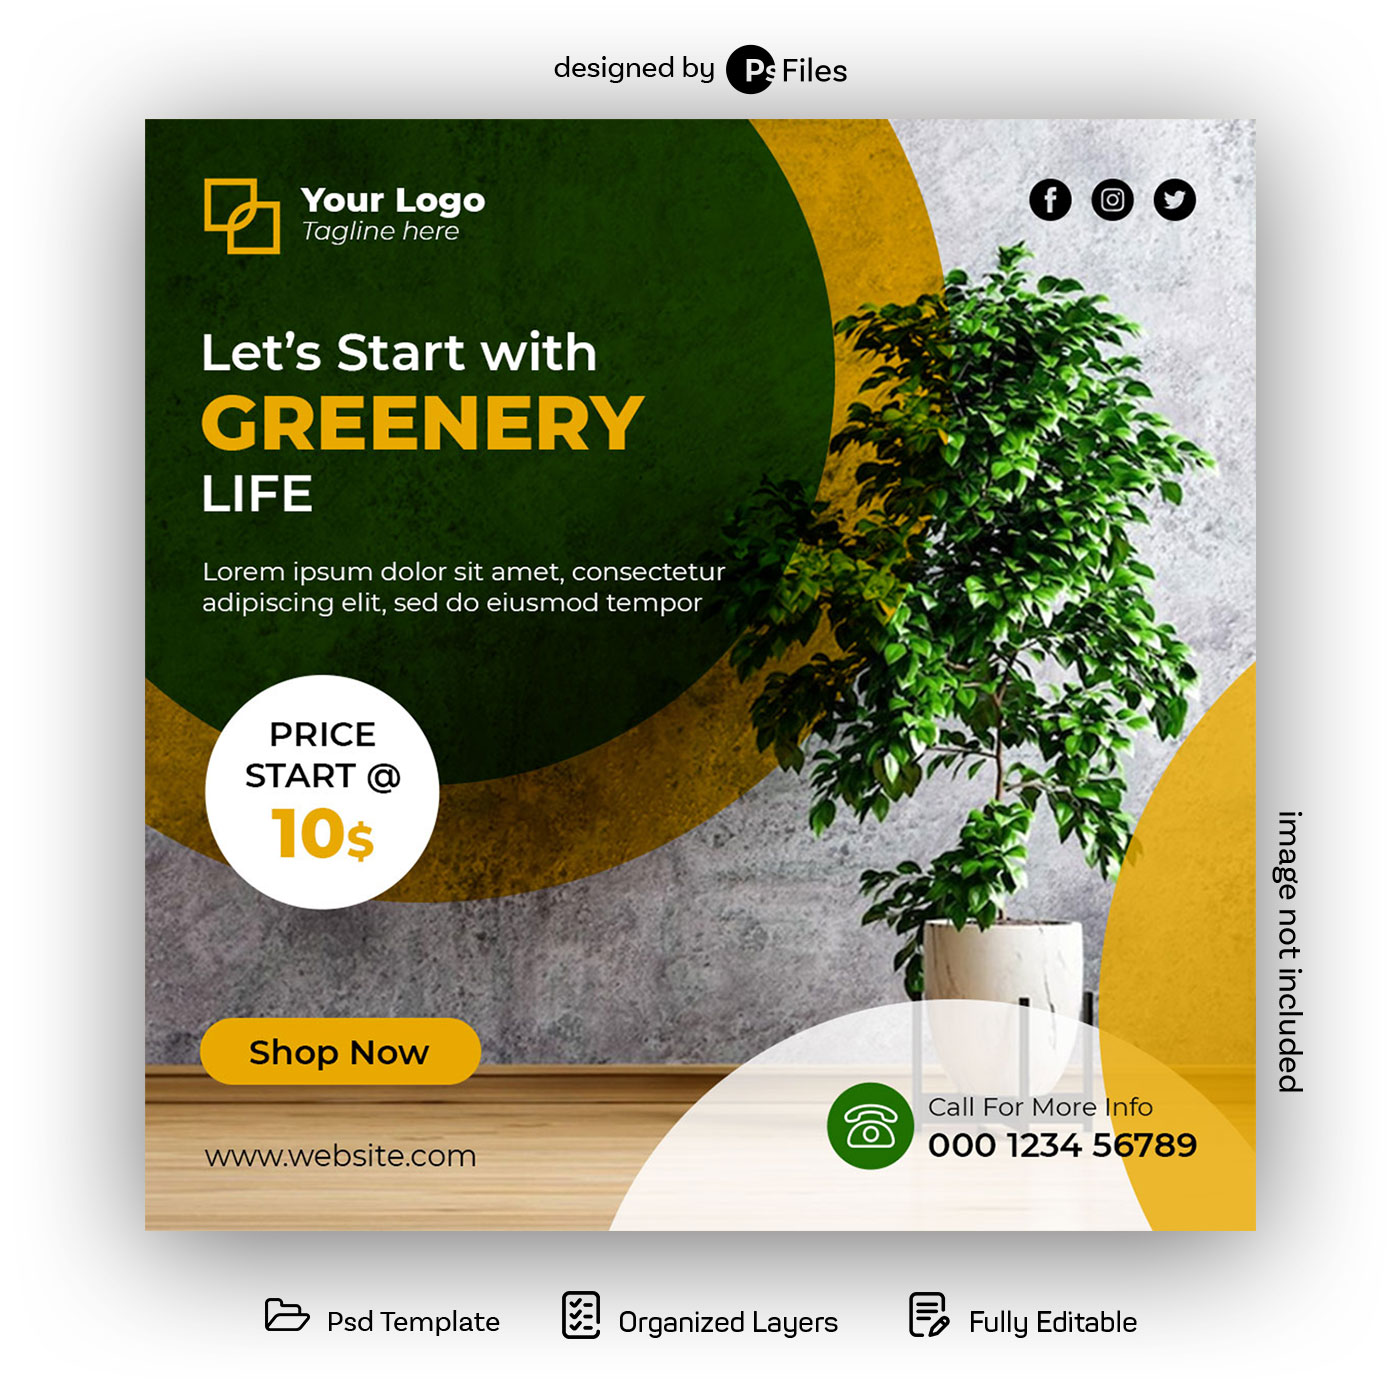 Free Social Media Post Design PSD Template for Indoor Plant Sales